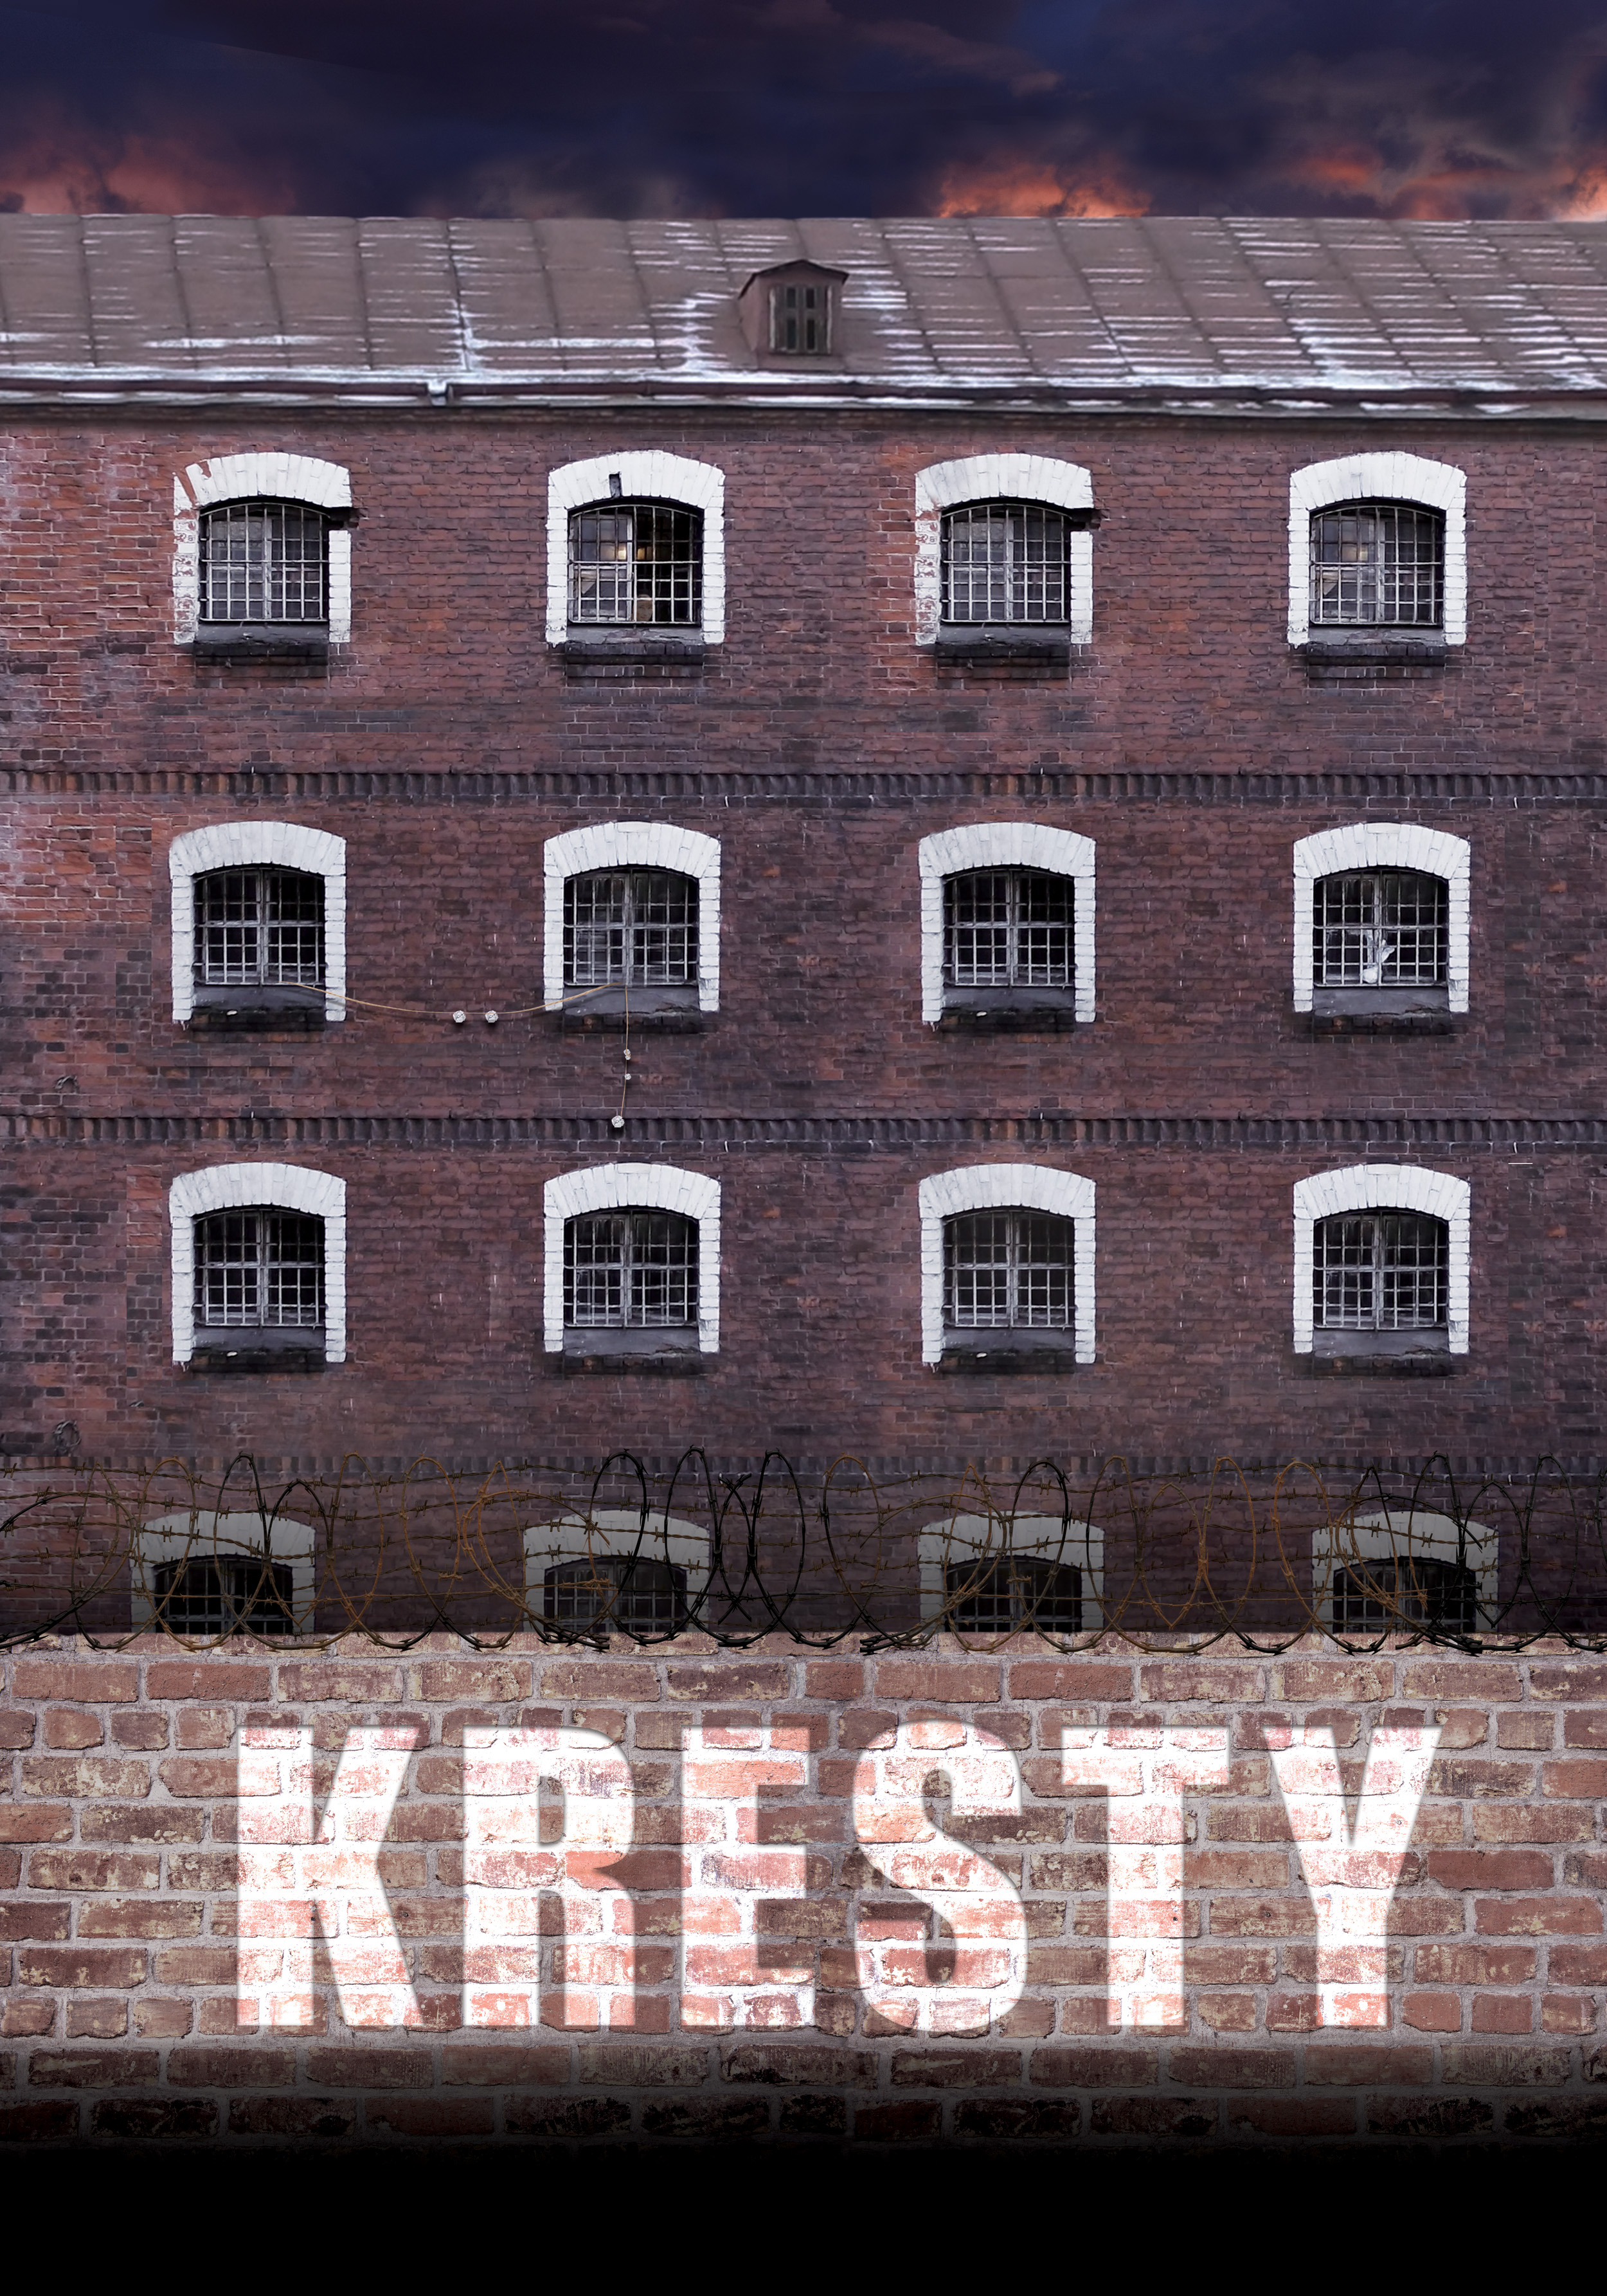 THE DOCUMENTARY KRESTY WILL BE RELEASED ON NETFLIX